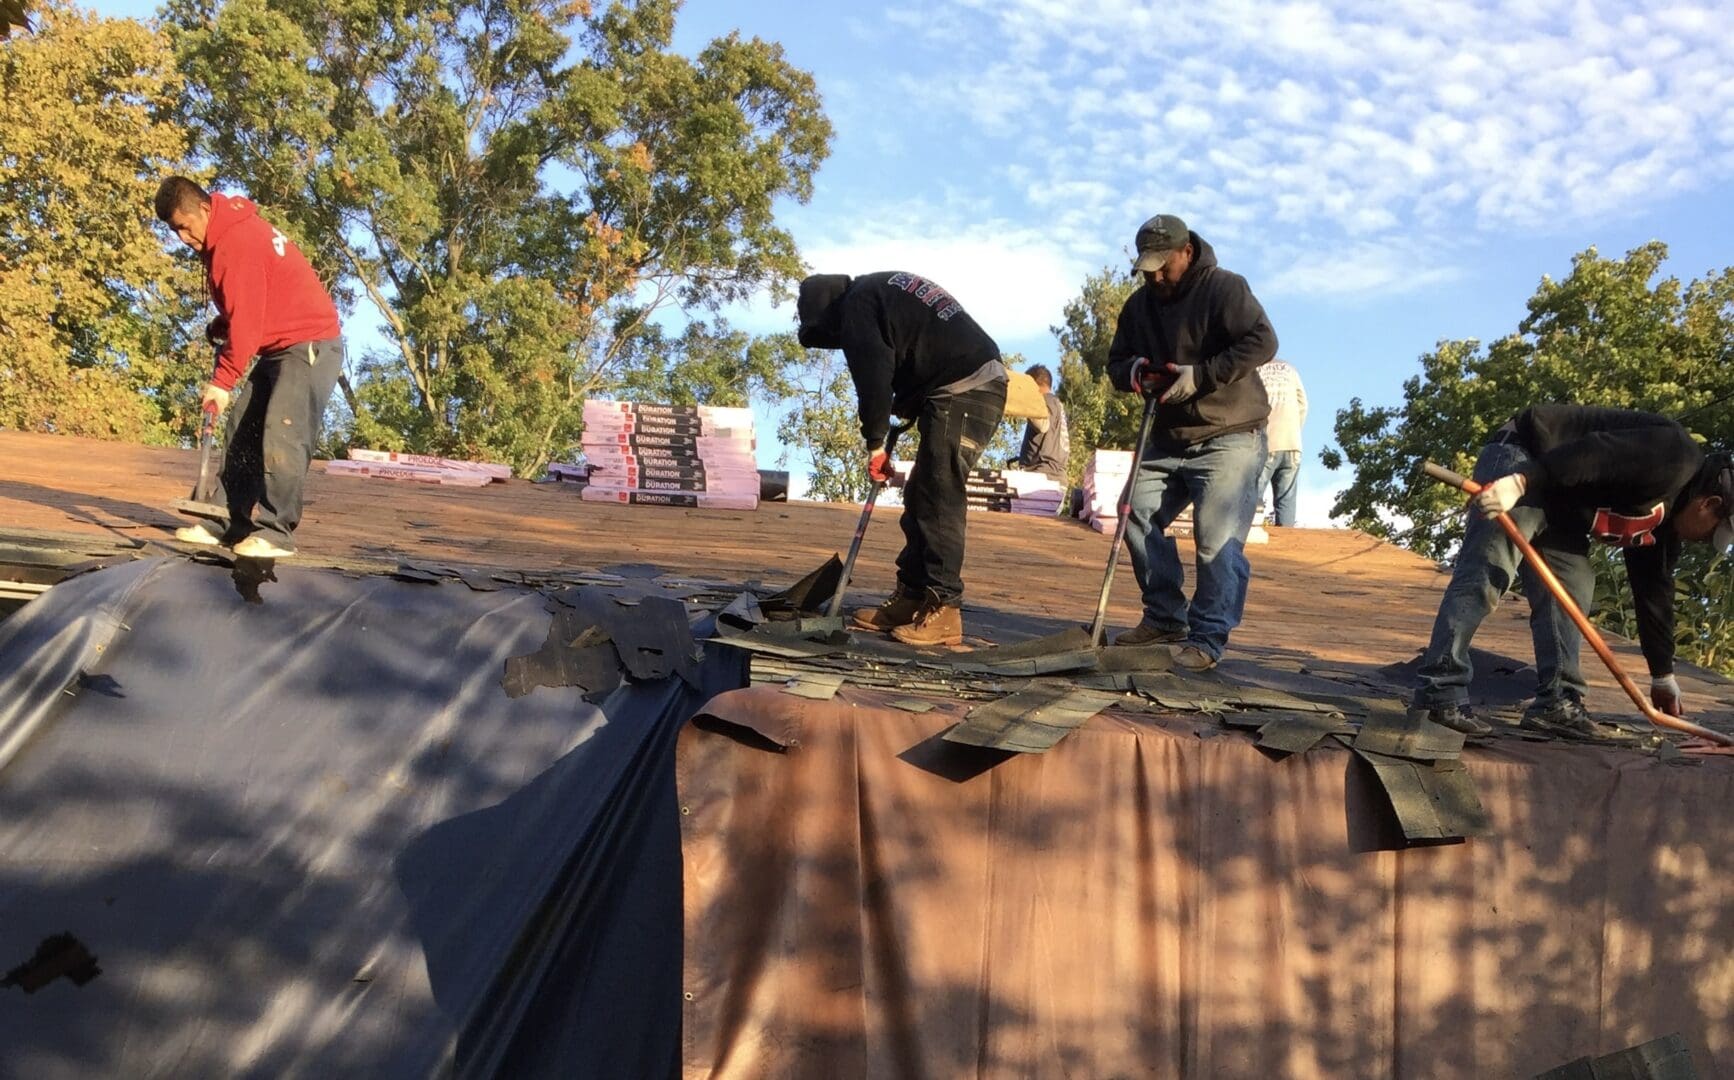 Two men working on a tarp covering a roof.